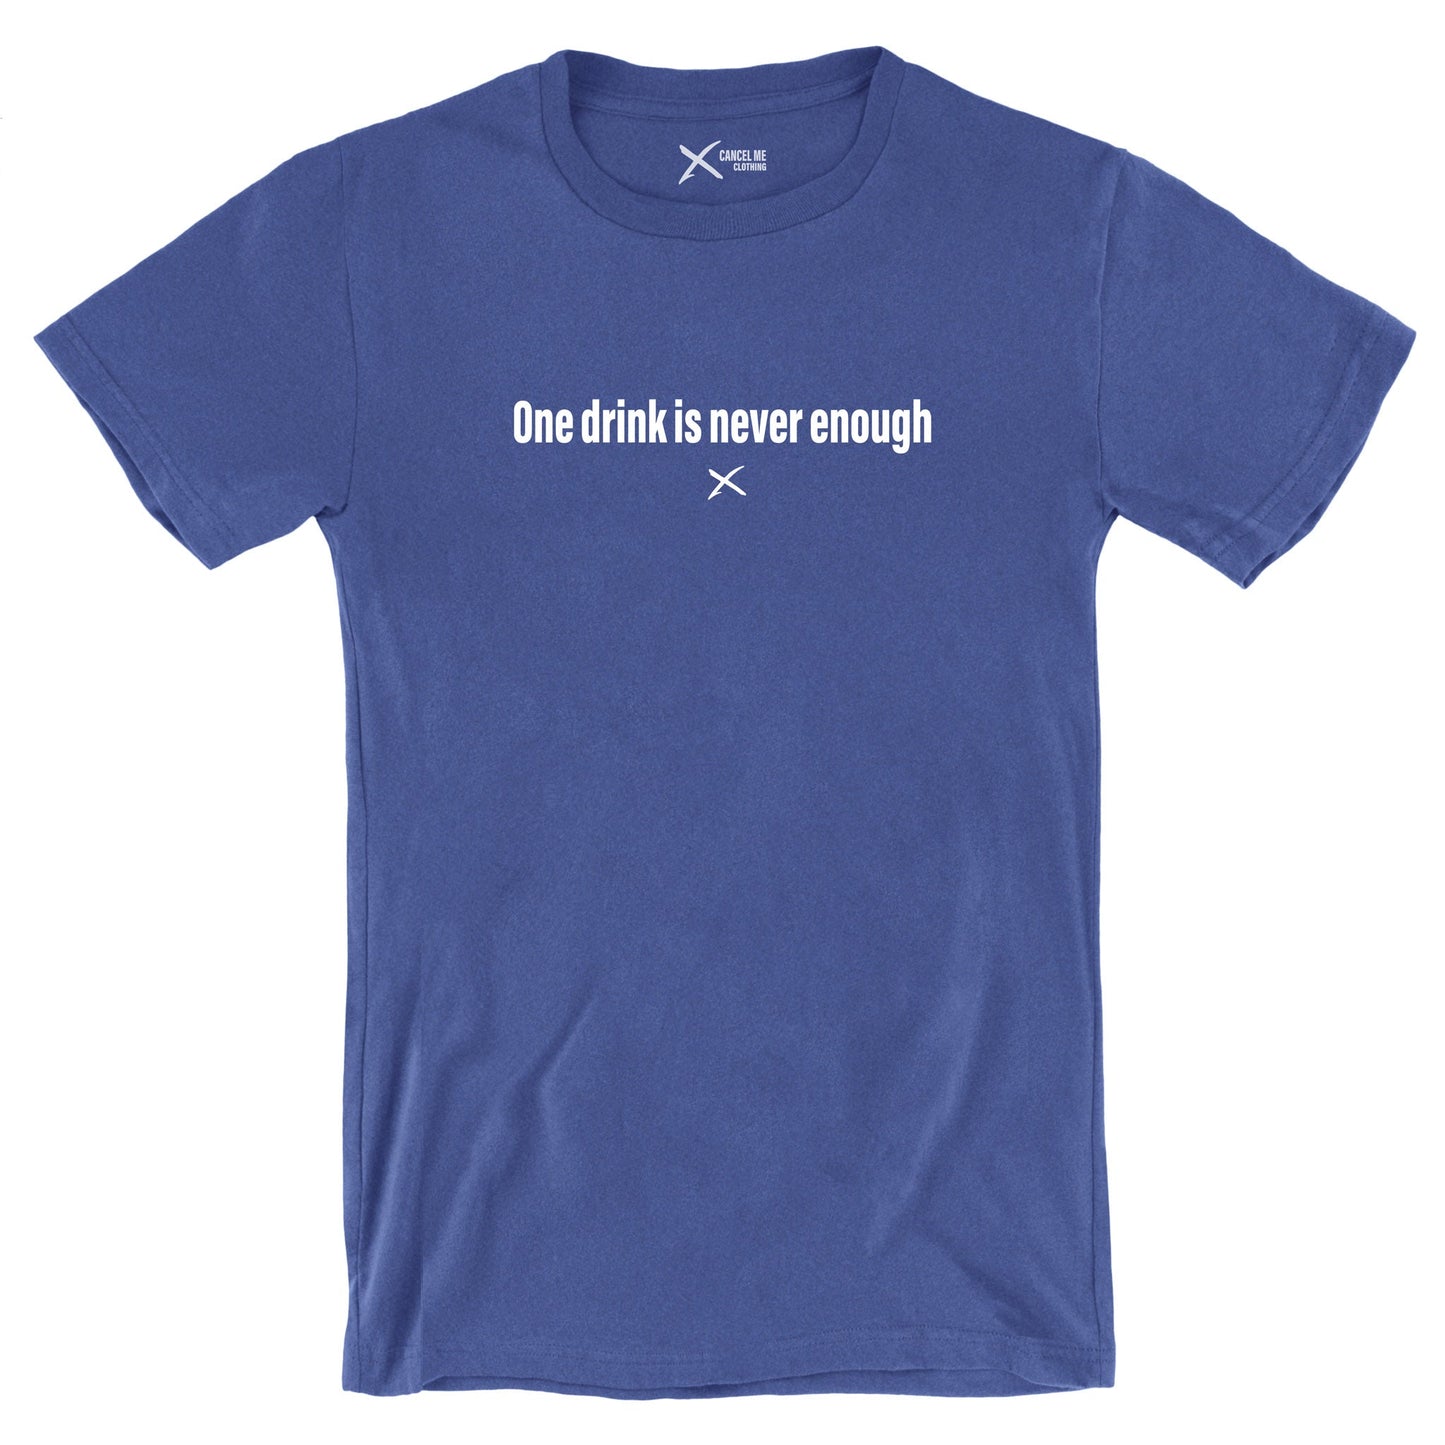 One drink is never enough - Shirt